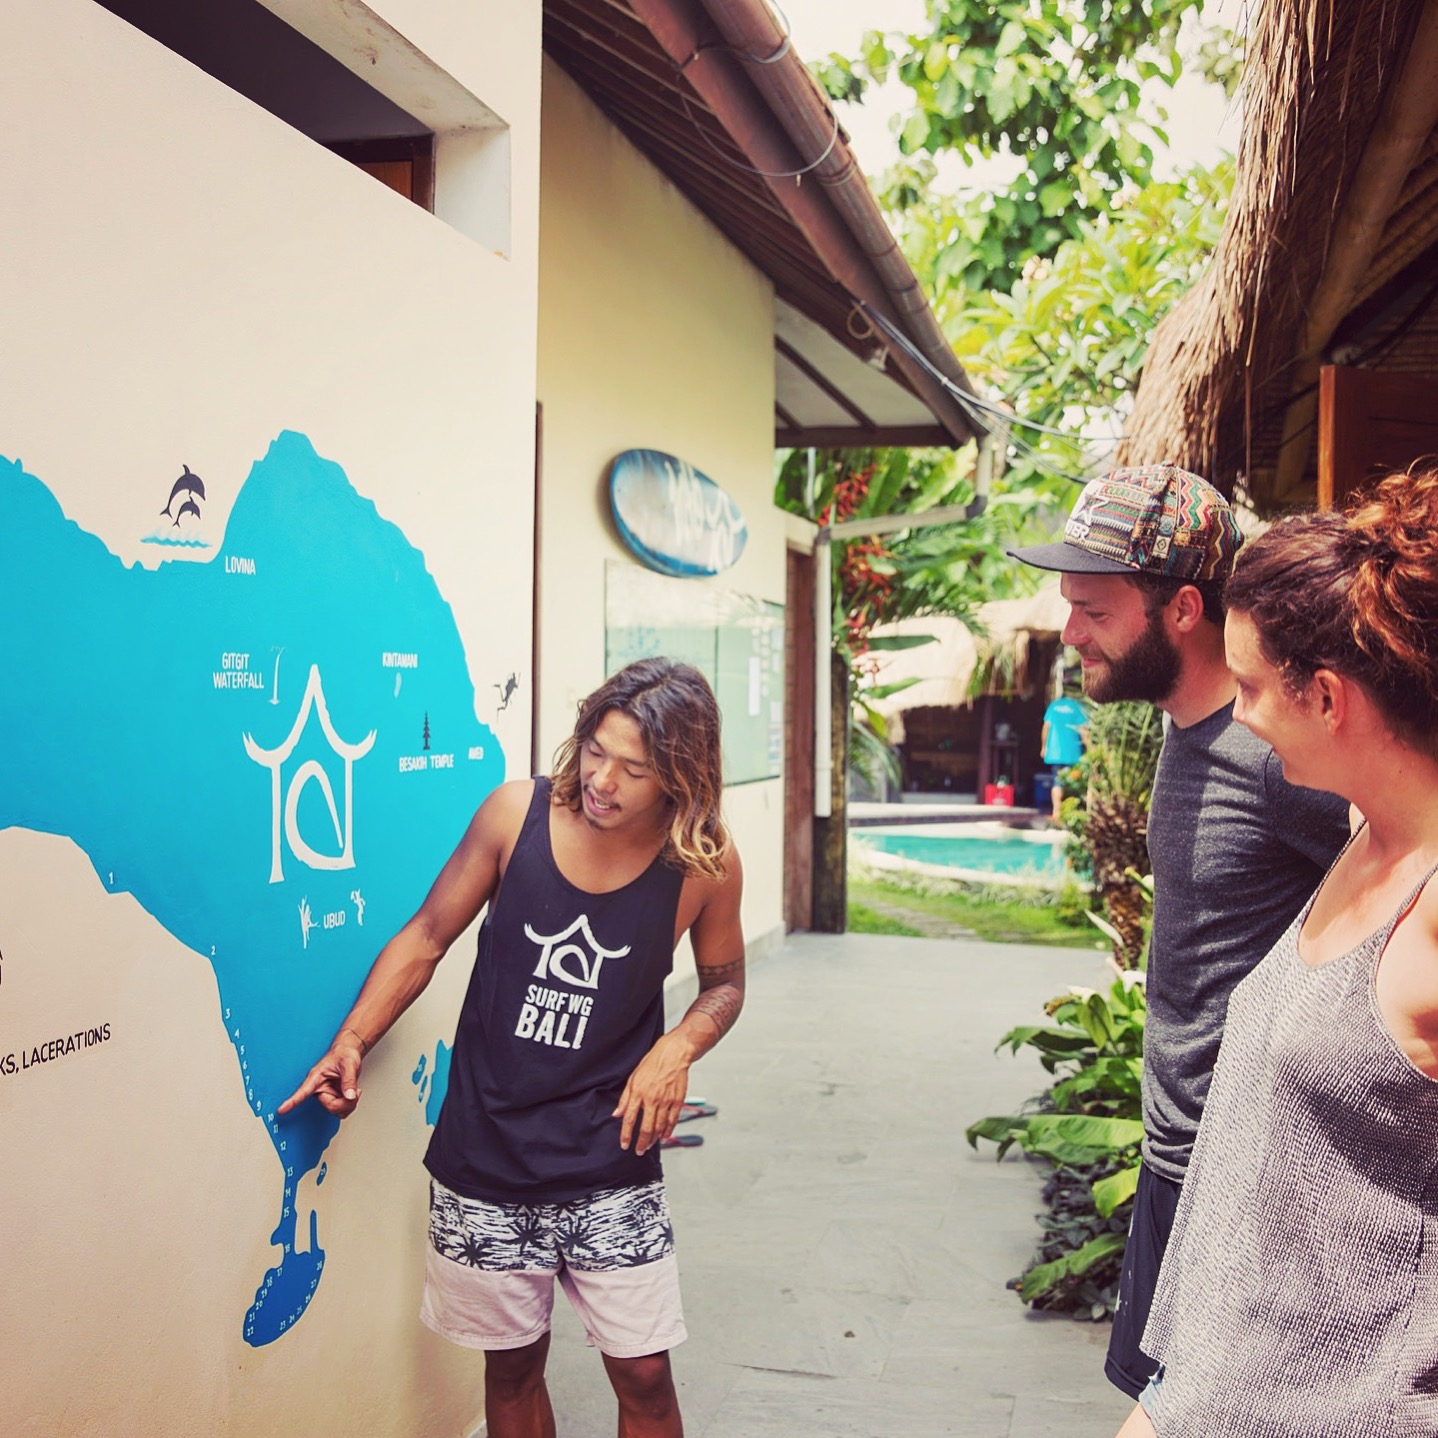 A surf guide showing our SurfWG bali Surf camp plan to guests at our surf school Bali